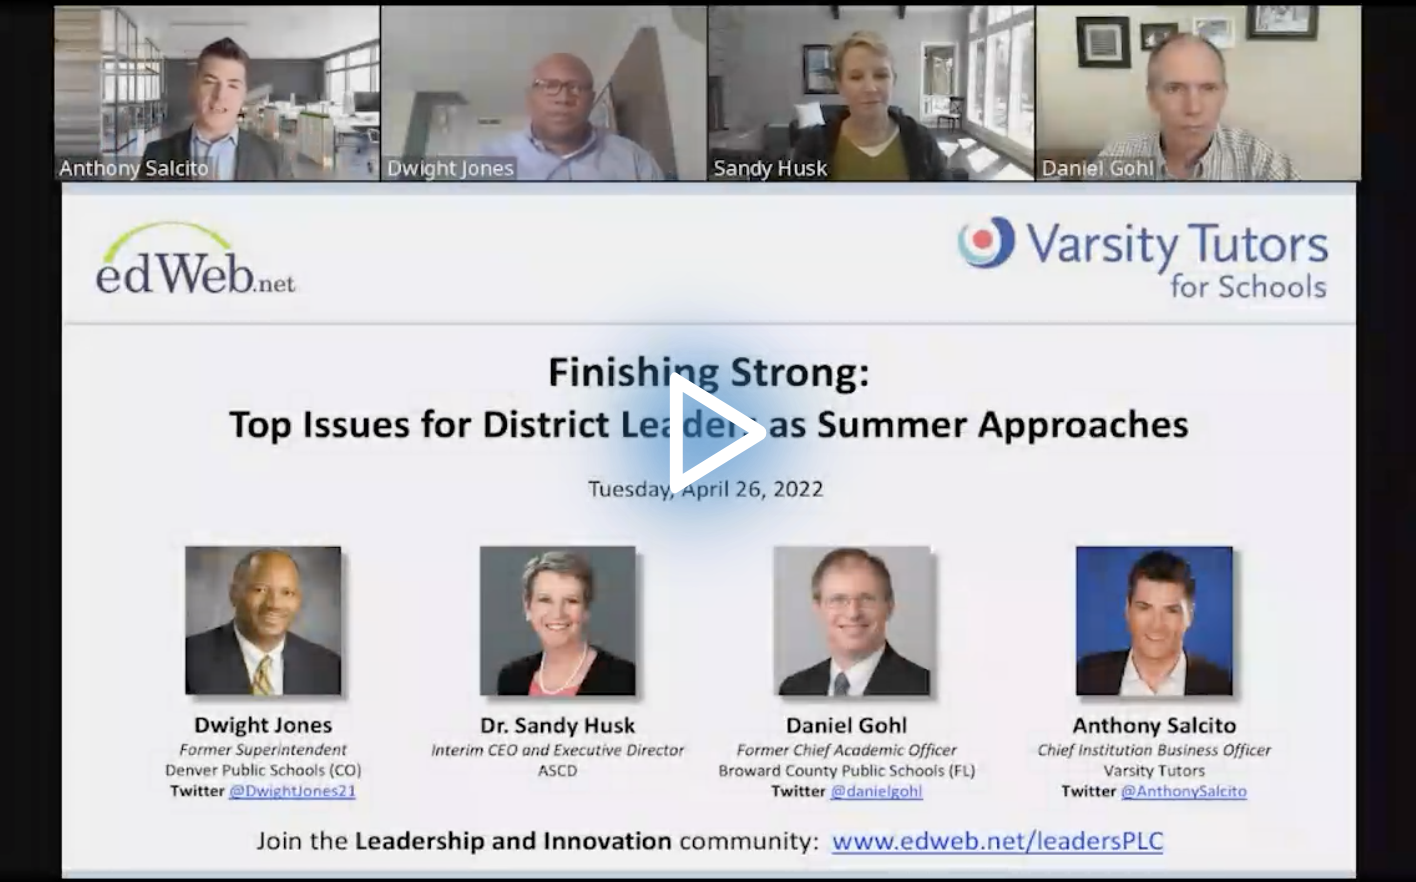 Finishing Strong: Top Issues for District Leaders as Summer Approaches edLeader Panel recording link